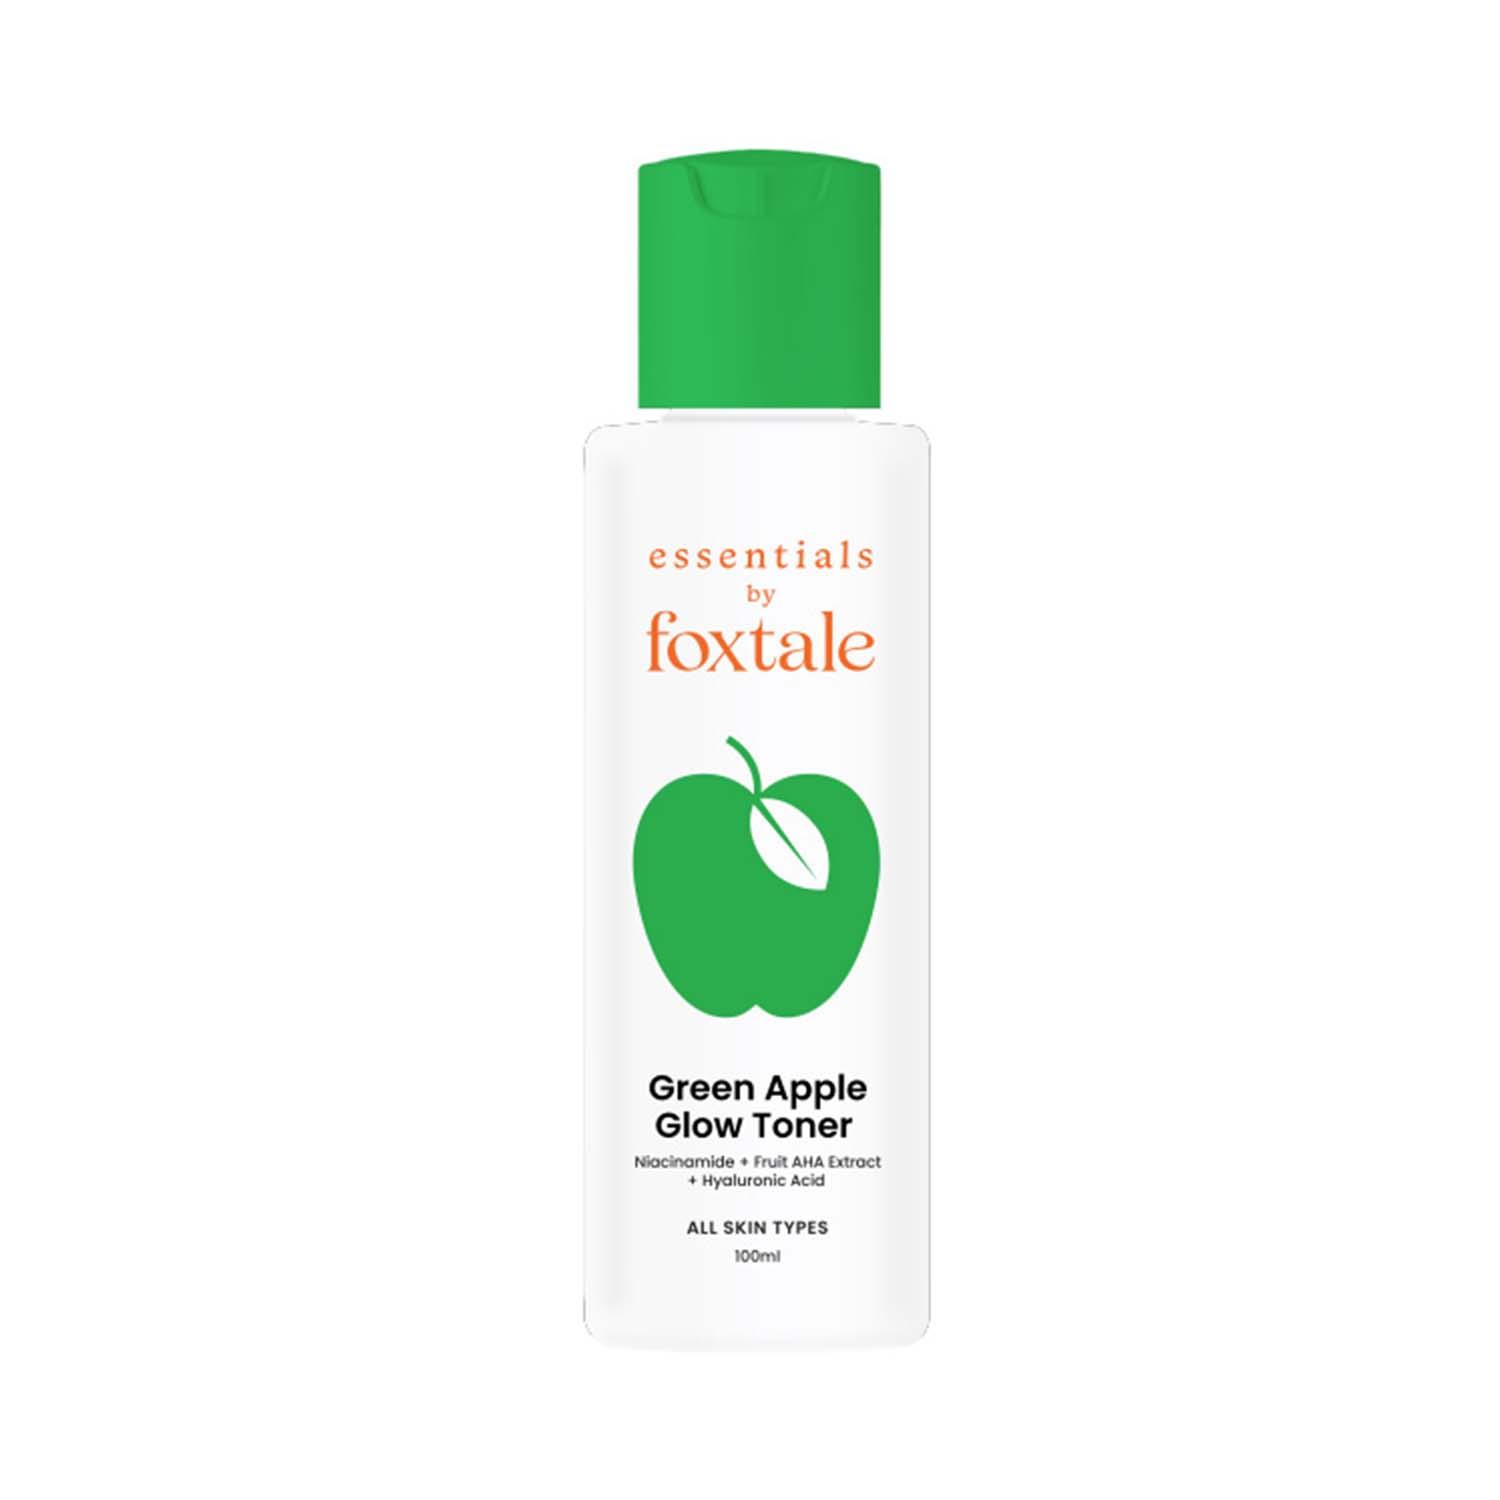 Foxtale Essentials Daily Green Apple Glow Toner With Niacinamide (100ml)